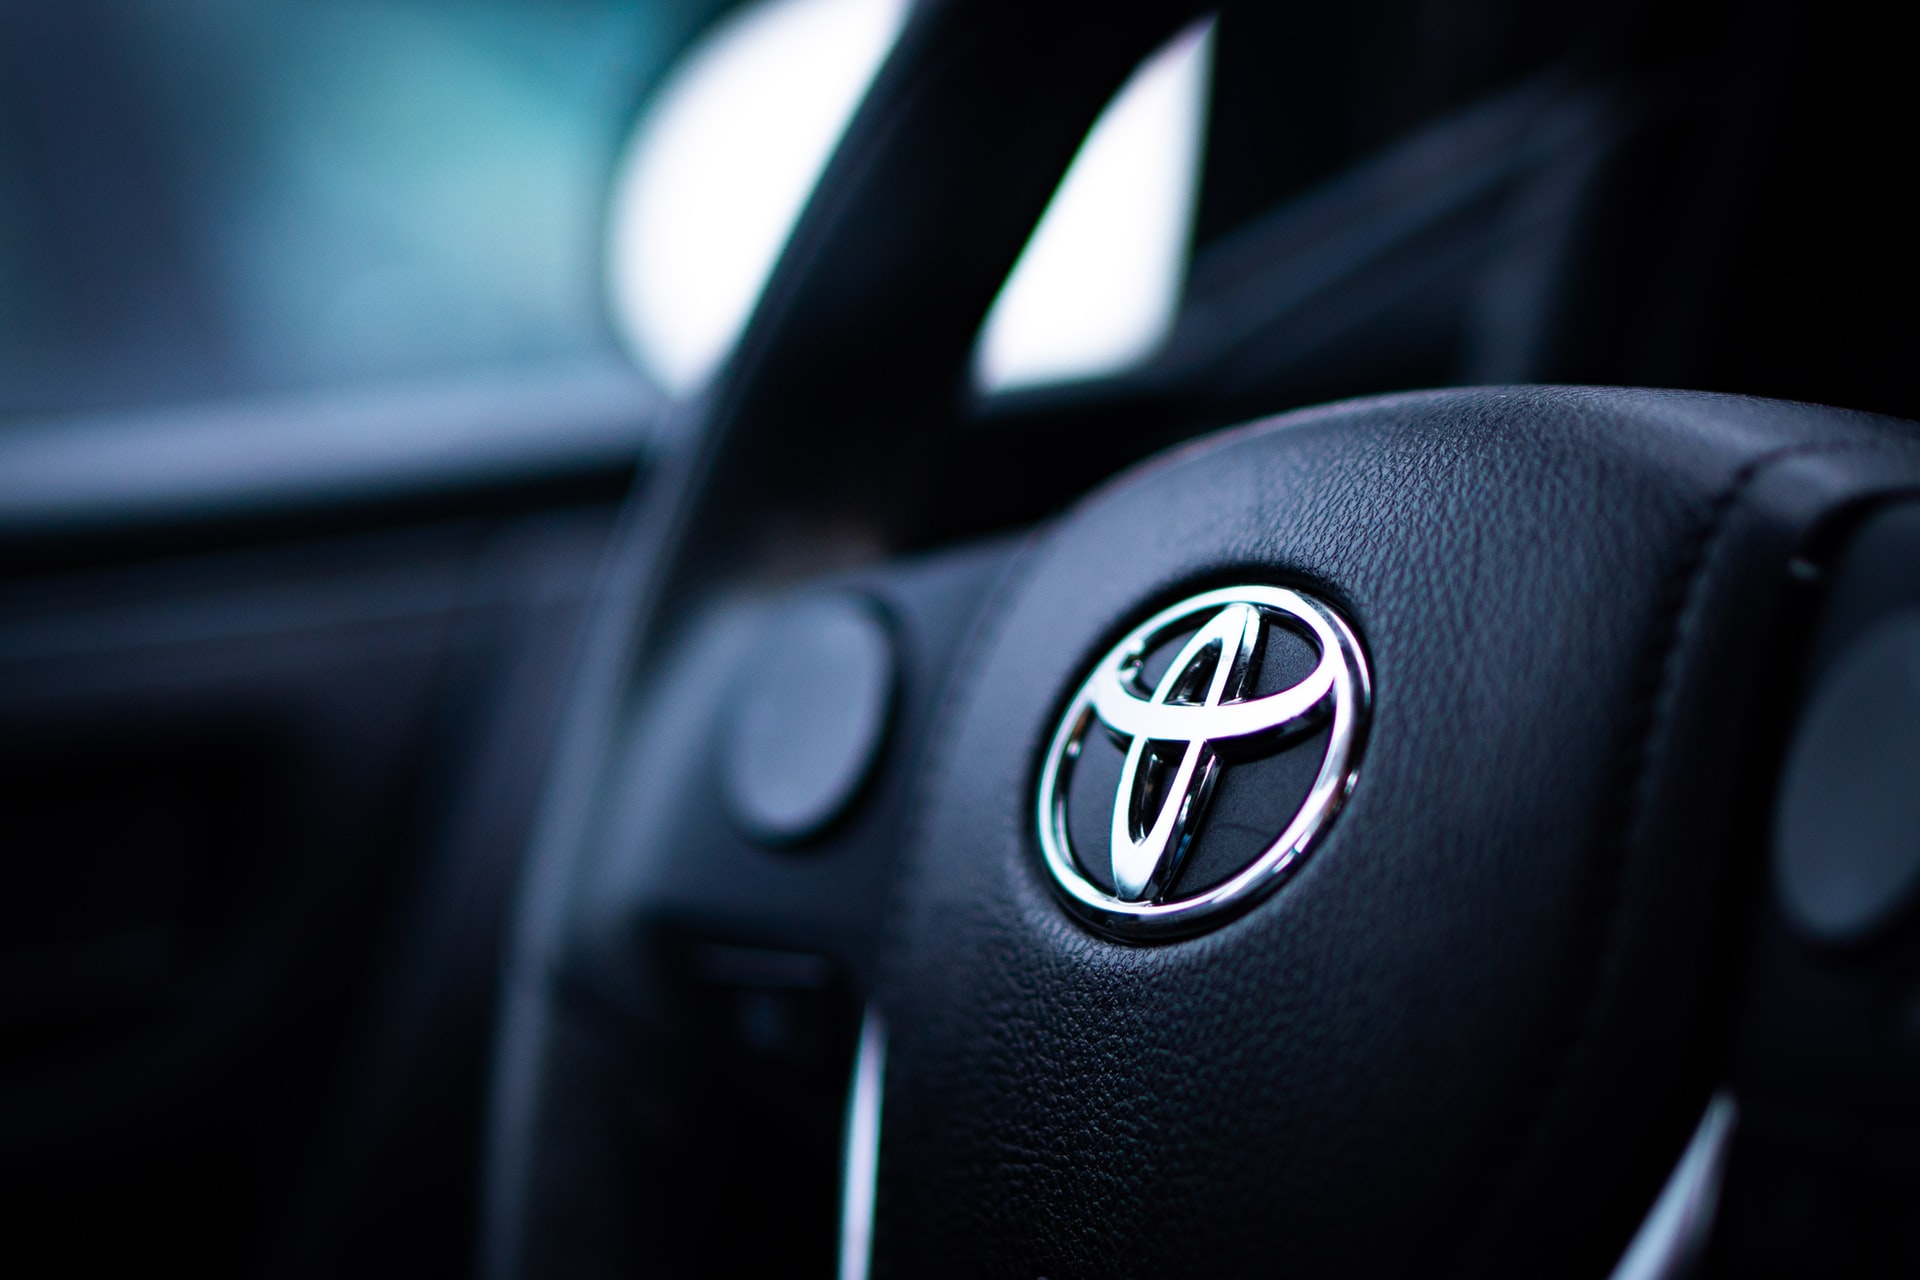 Toyota Motors Acquired U.S Based Map Data firm for Driverless Vehicles